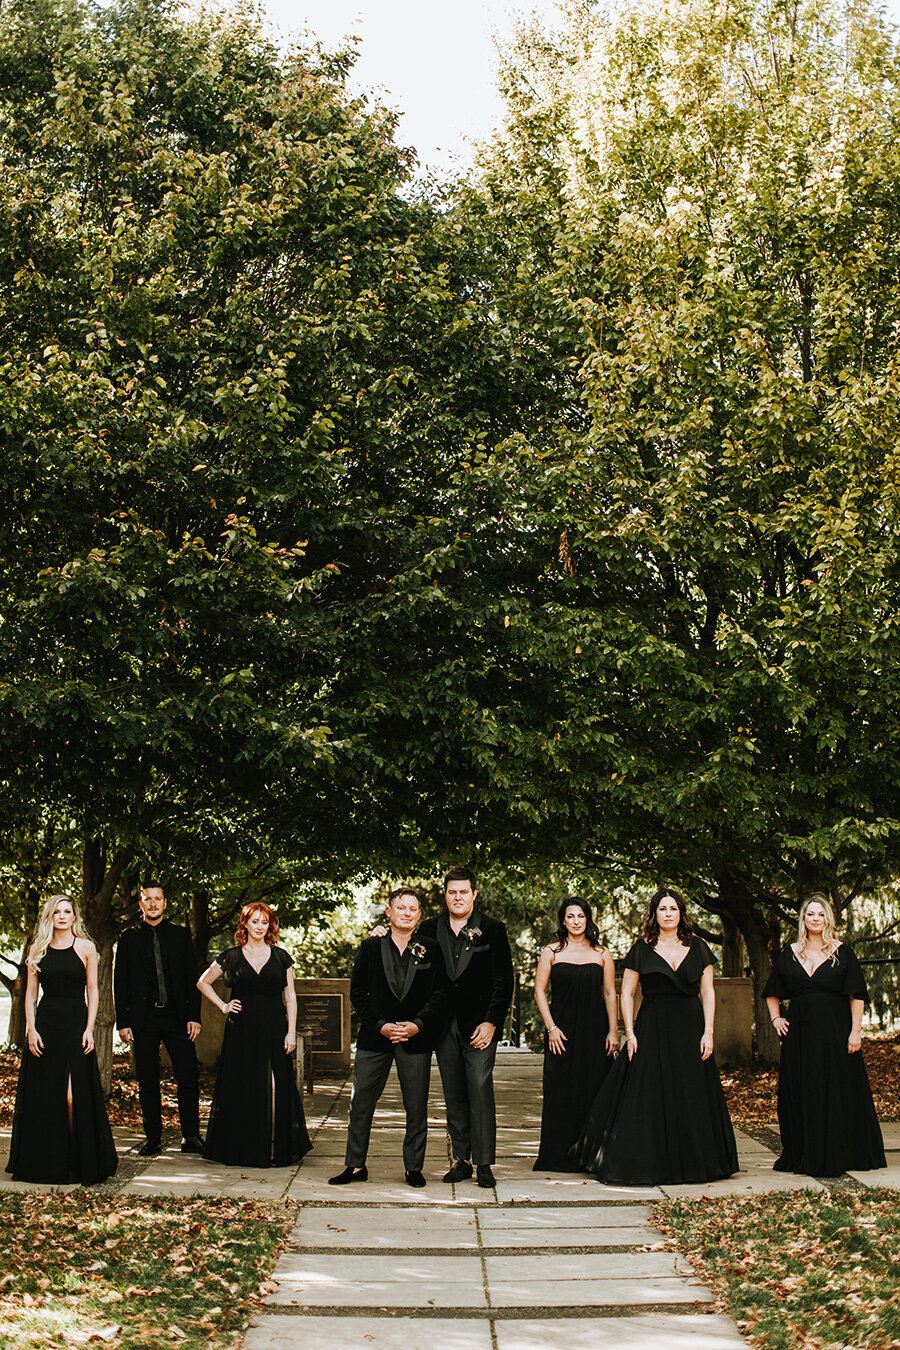 Wedding party wearing all black outdoors surrounded by large trees.